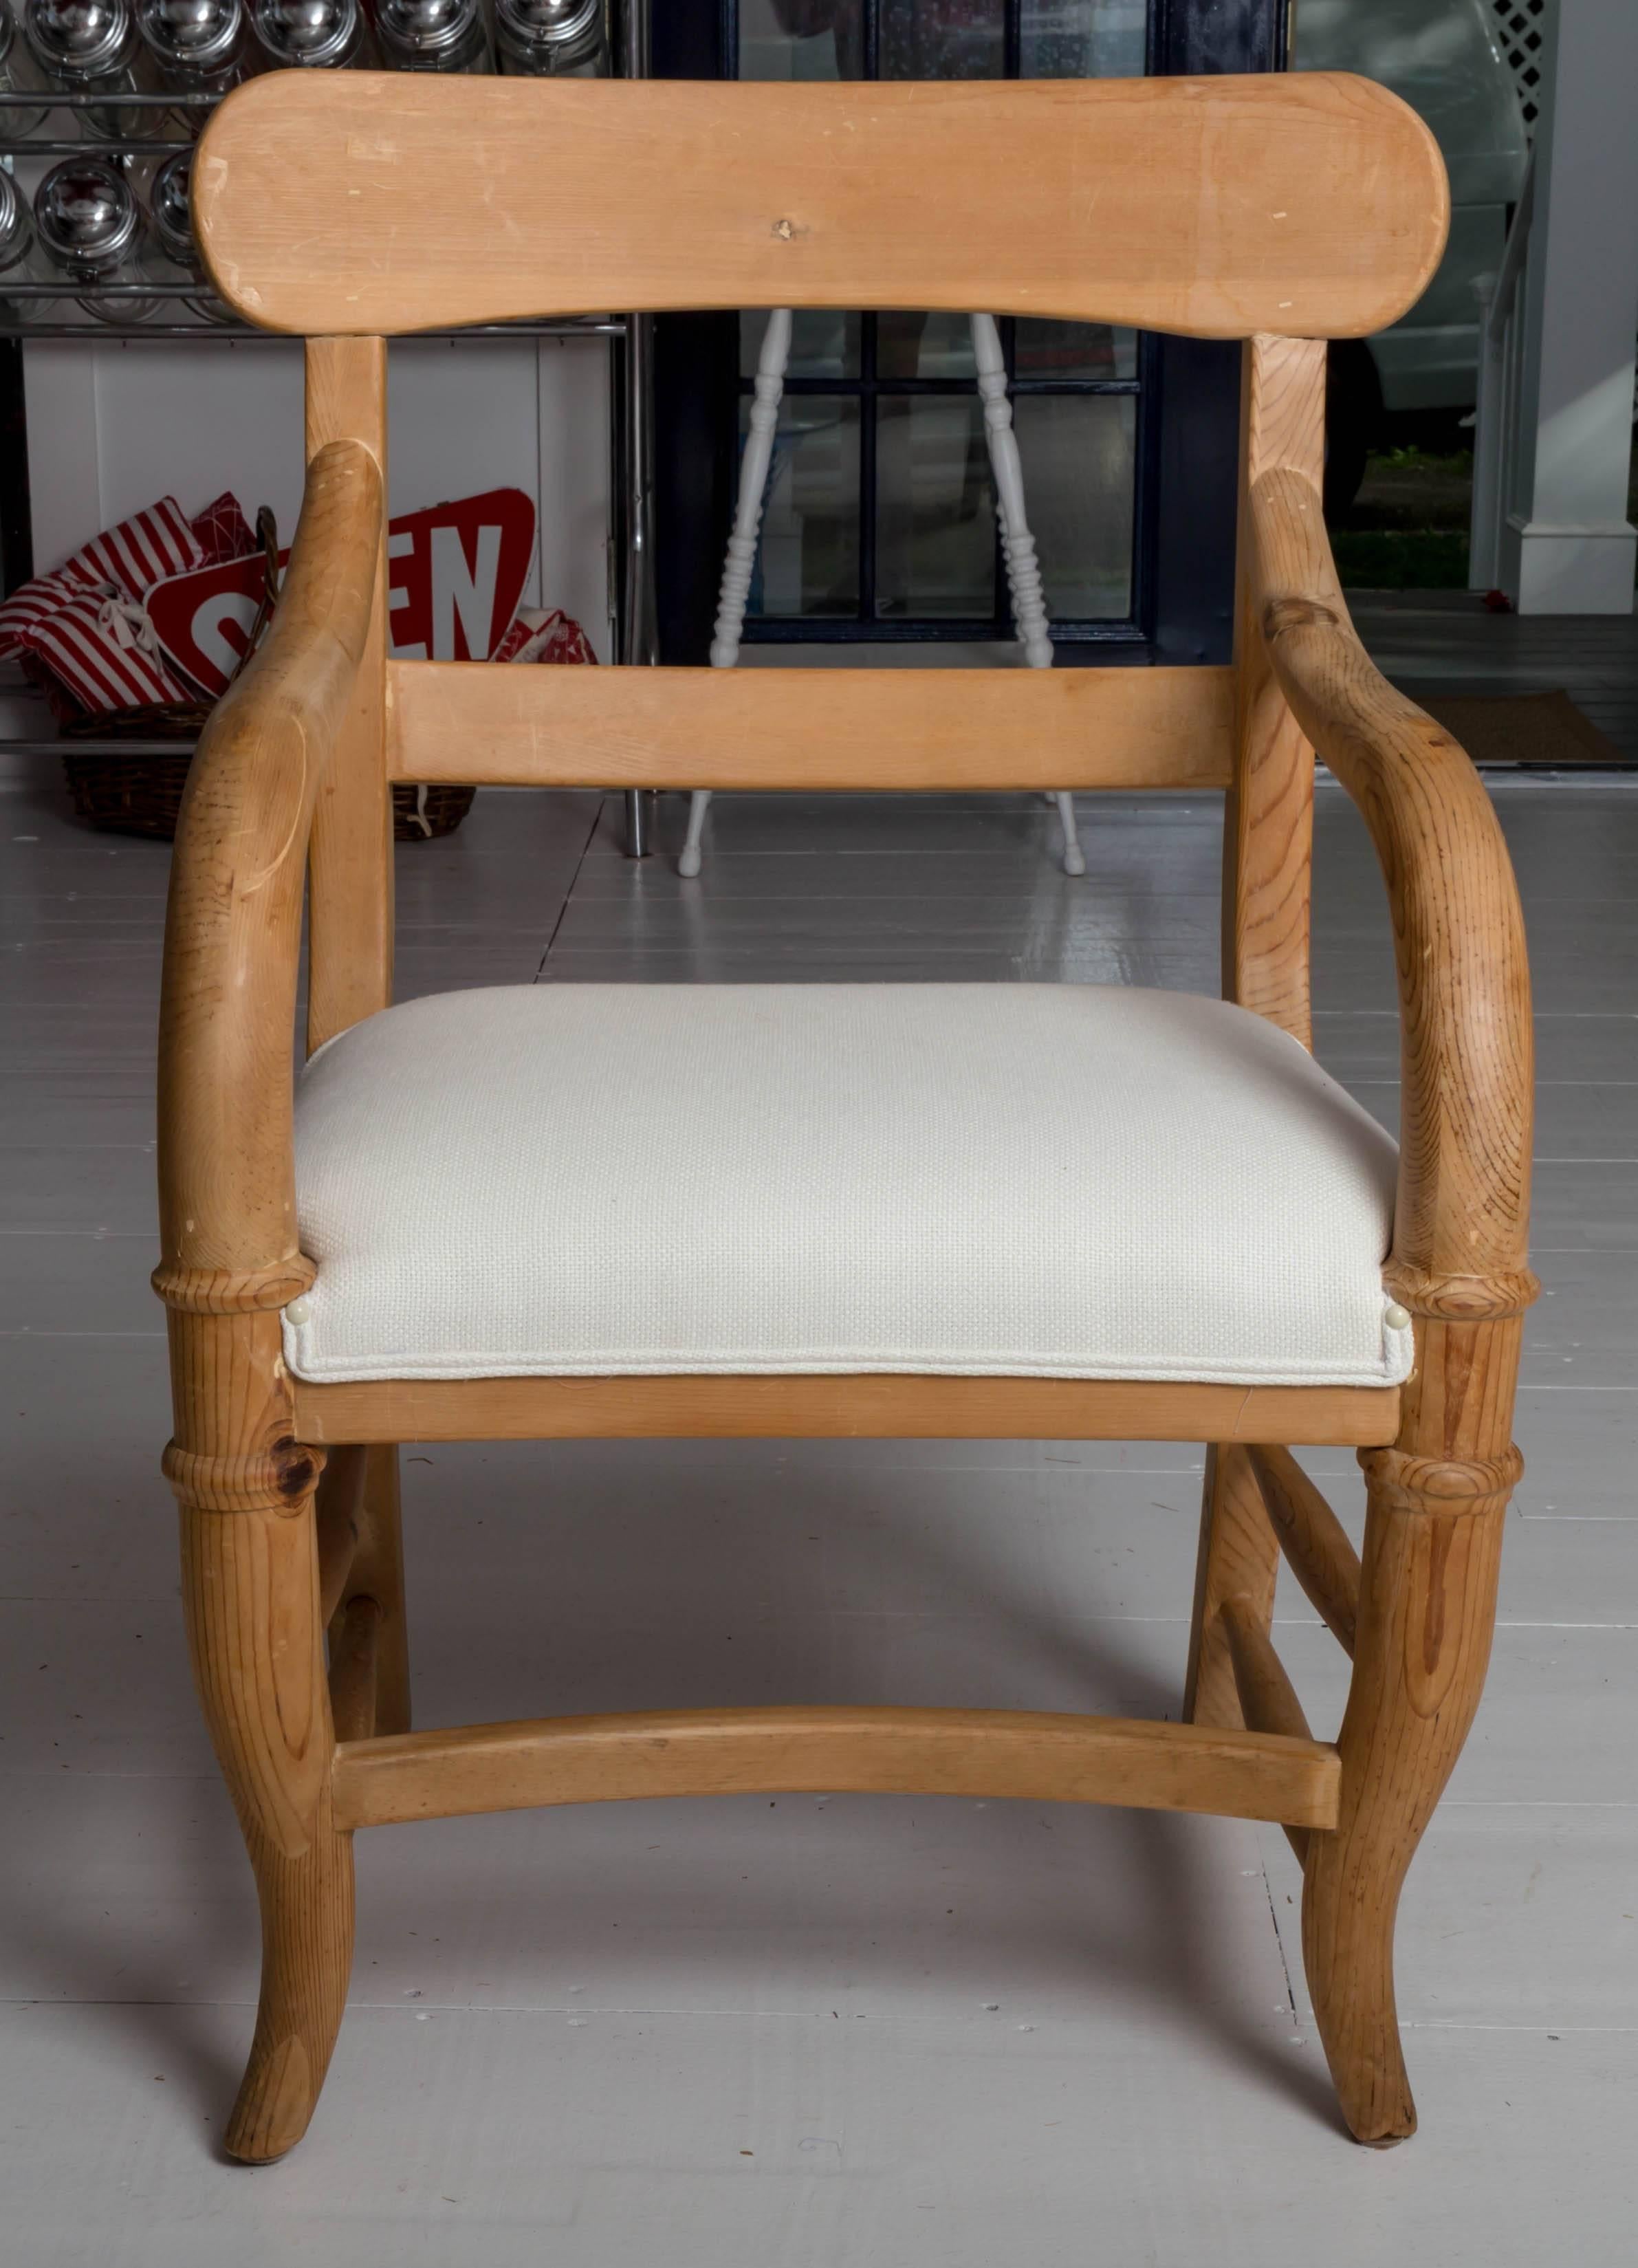 A wonderful rustic and sophisticated pair of pine chairs. Photographed in several different settings in the Michael Taylor book. Newly upholstered in linen.

place of origin
Mexico
date of manufacture
1970

dimensions
38.5 in. H x 21.5 in. W x 23.5